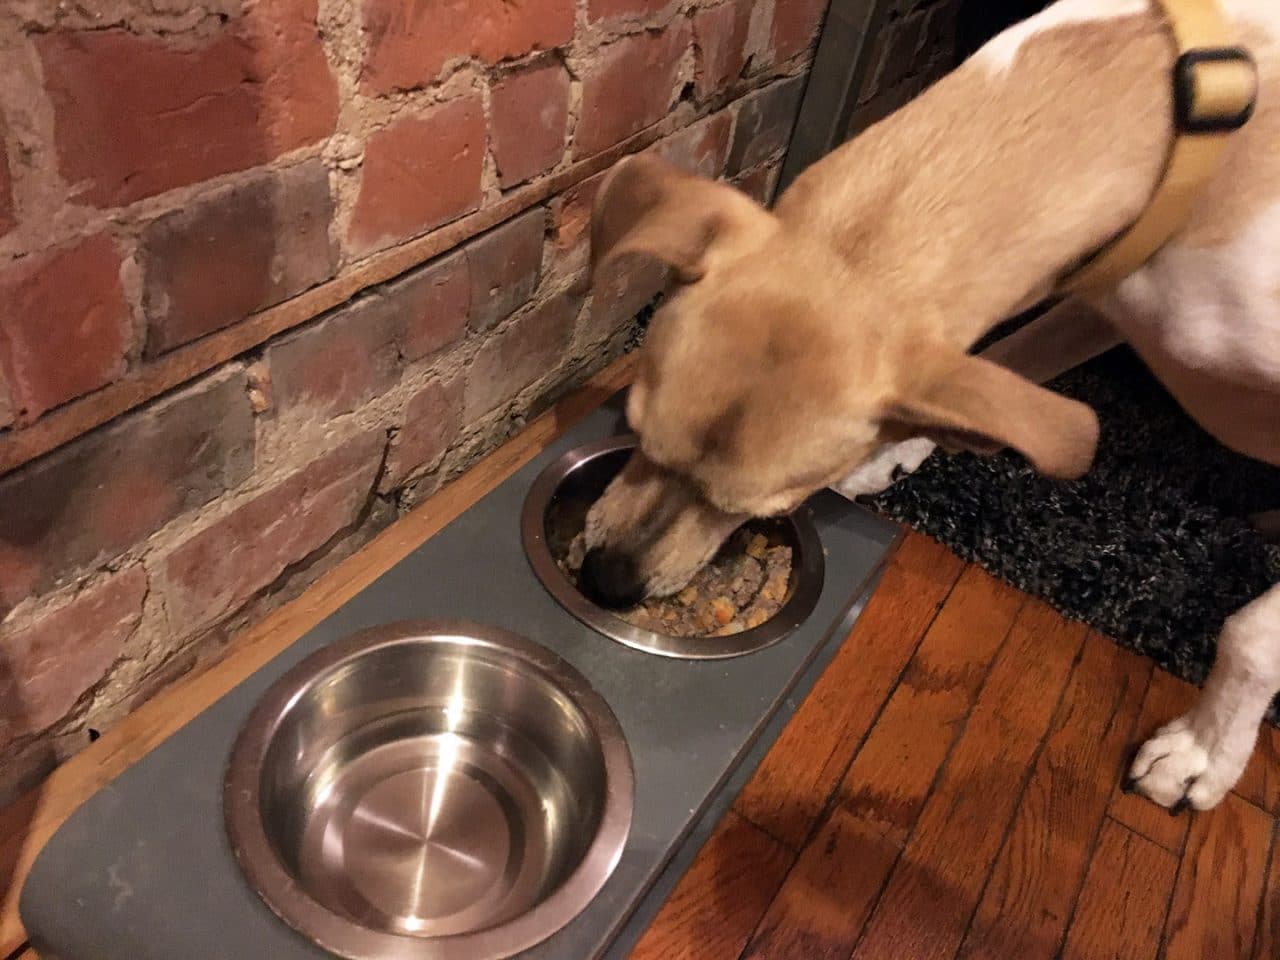 Daisy's first bowl of fresh dog food was gone in no time.